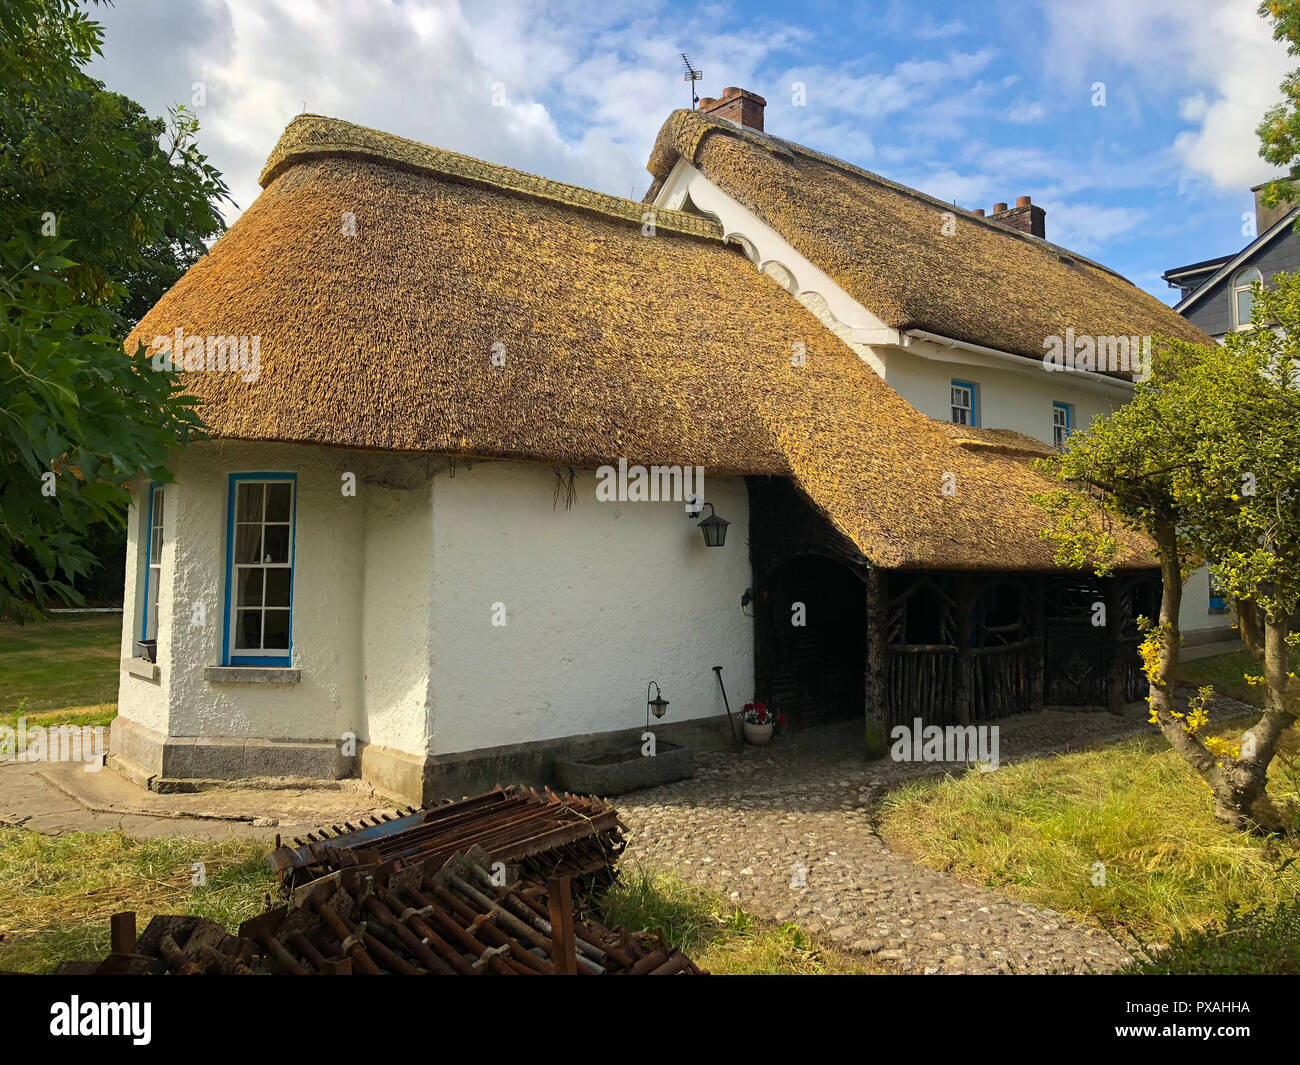 Adare, Ireland - 13 July,2018: Adare is a small village in County Limerick, Ireland,Architectural forms include the thatched cottages near the entranc Stock Photo